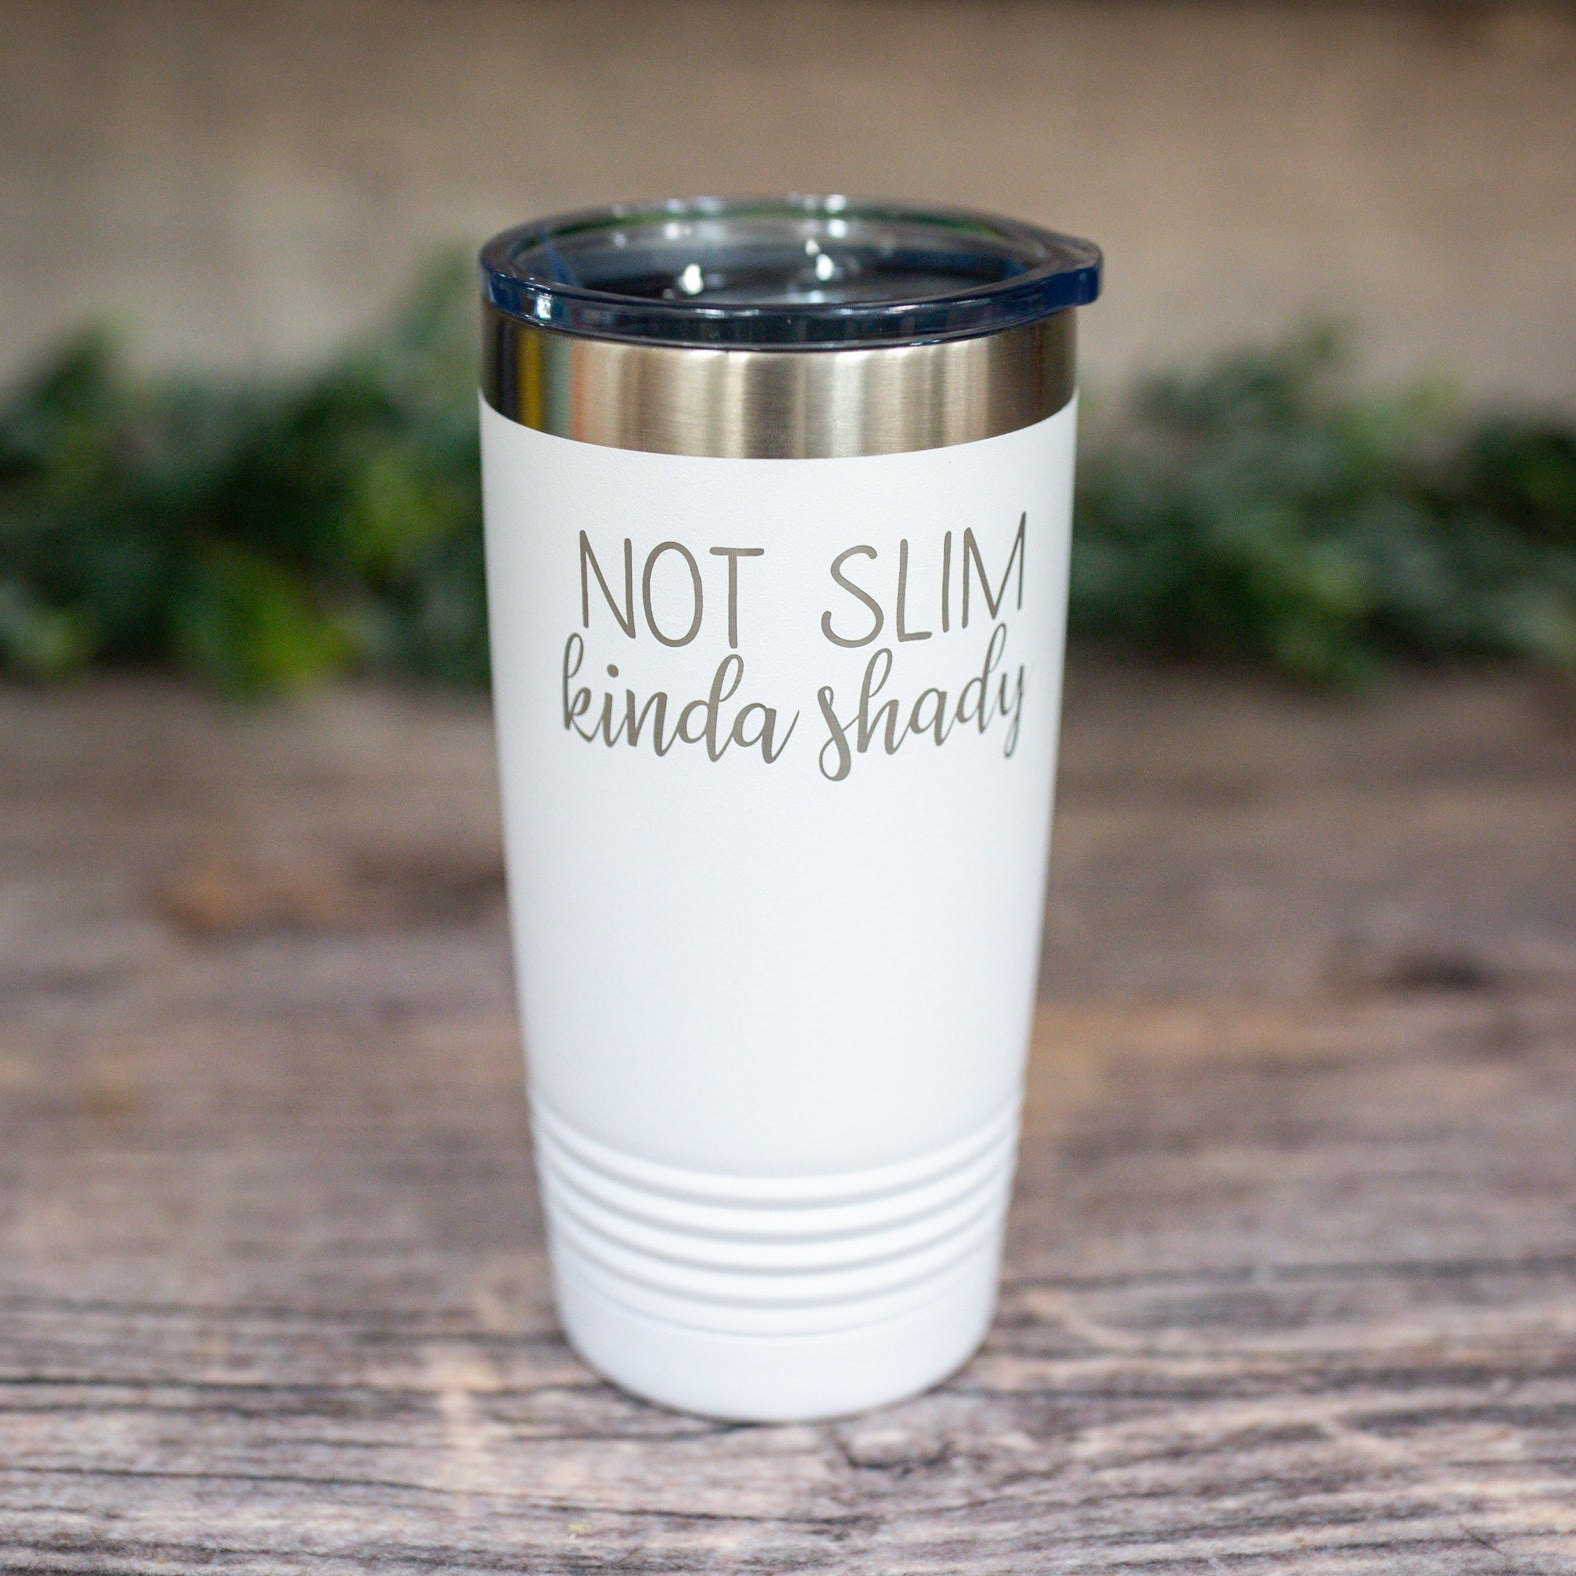 https://3cetching.com/wp-content/uploads/2021/07/not-slim-kinda-shady-engraved-stainless-steel-tumbler-funny-gag-gift-funny-gift-cup-60f729b6.jpg